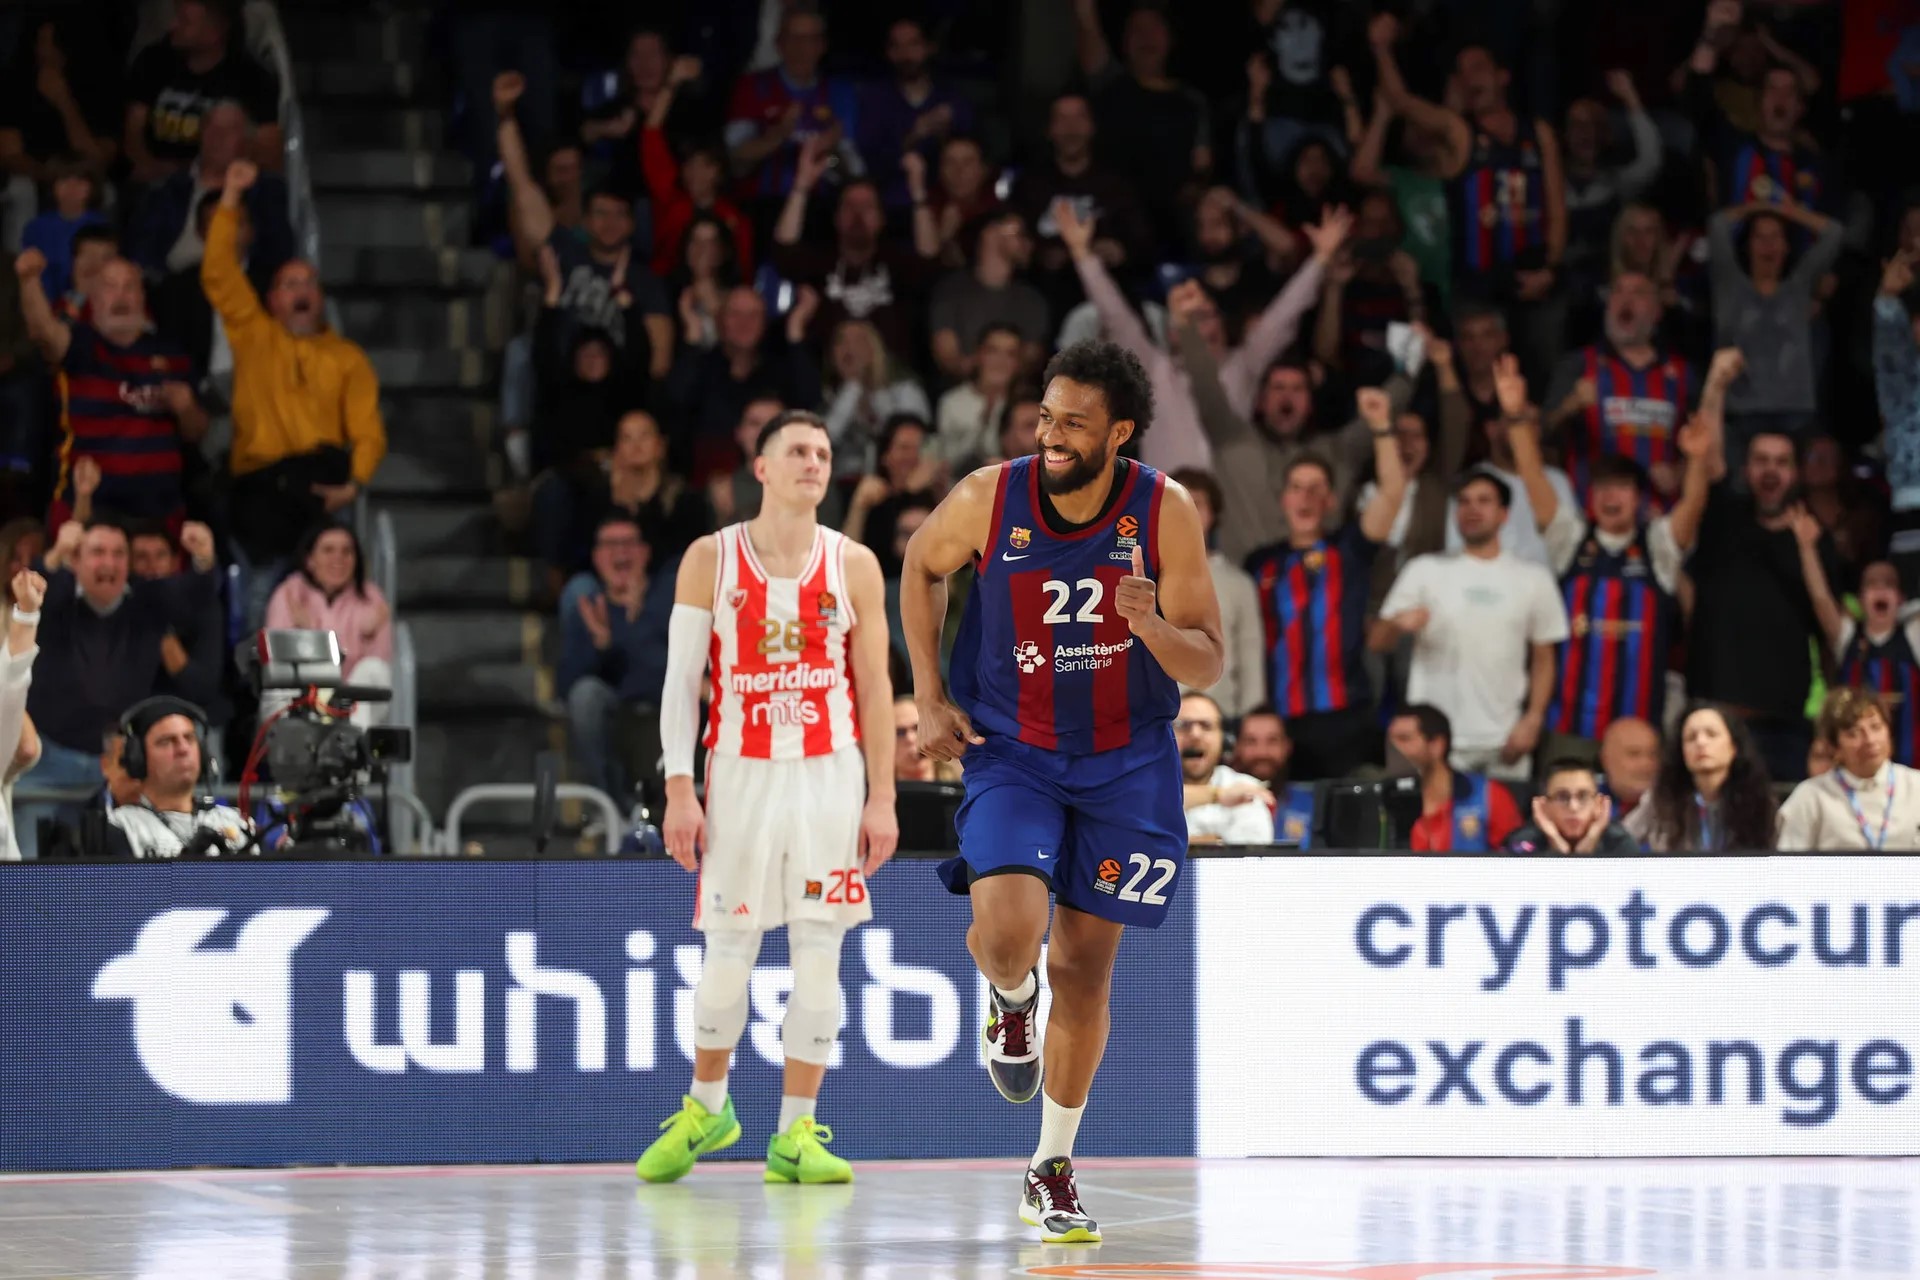 When the mood strikes him, Jabari Parker can look in total control in Euroleague